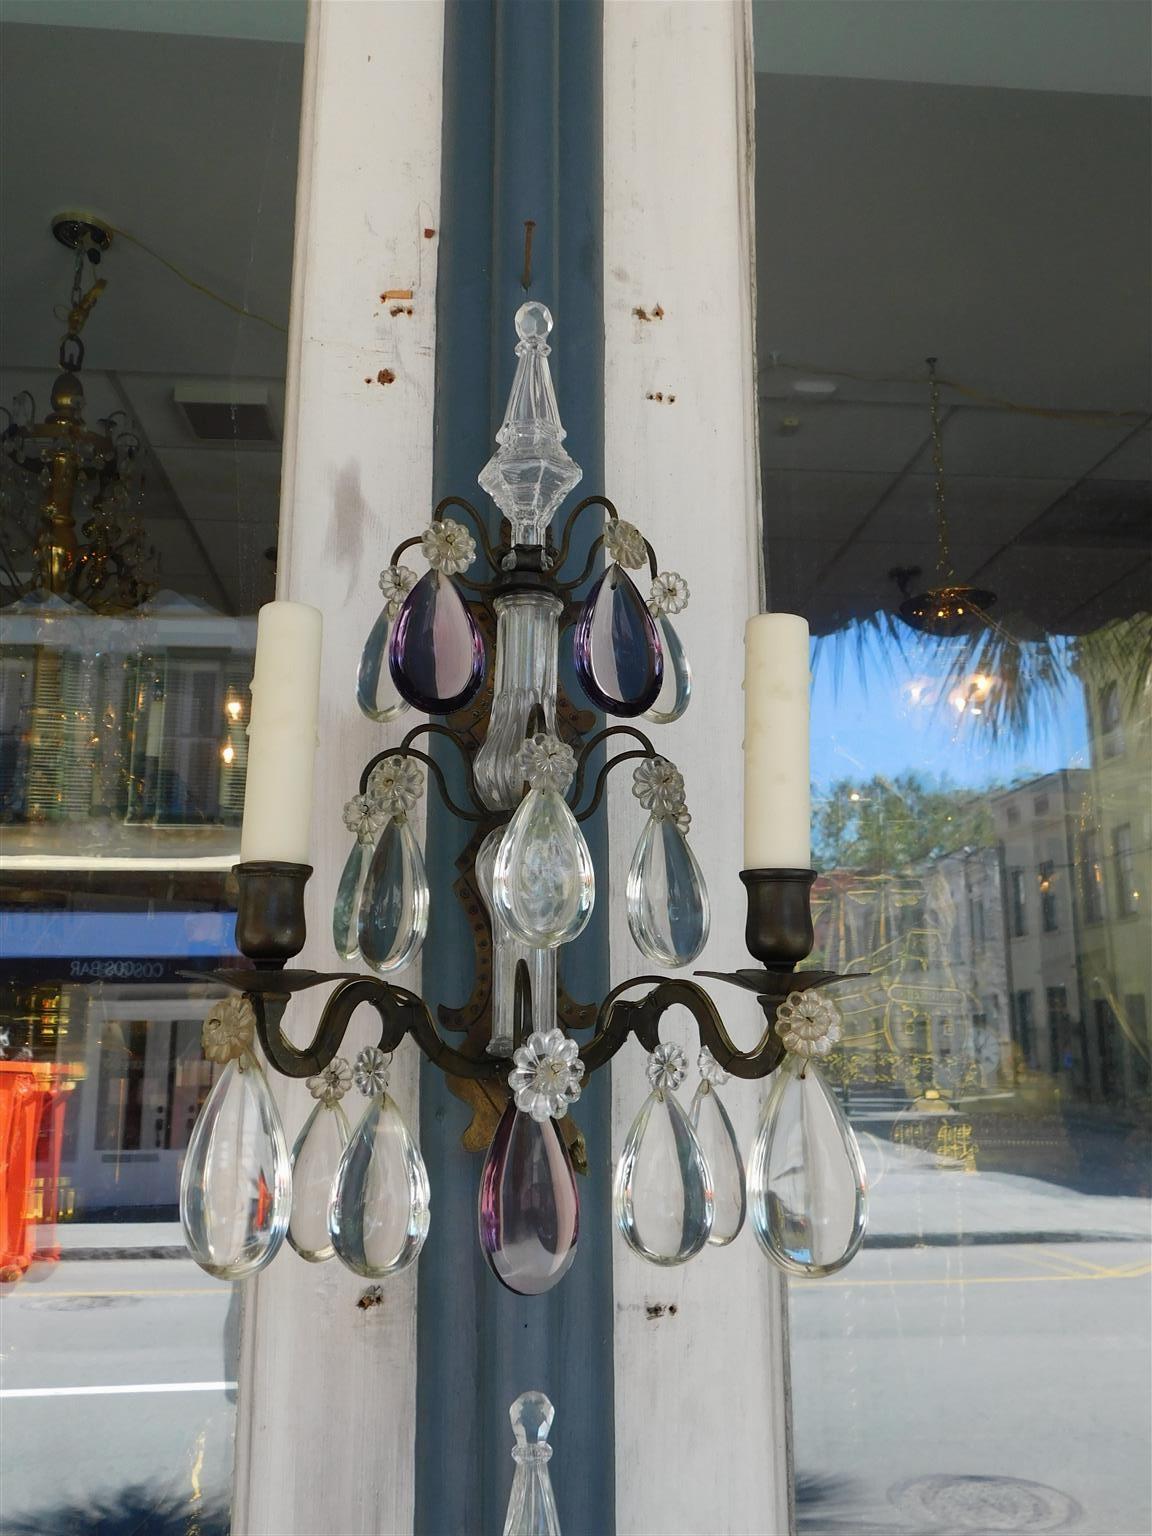 Pair of French Amethyst Crystal and Bronze Sphere Finial Wall Sconces, C. 1820 For Sale 2